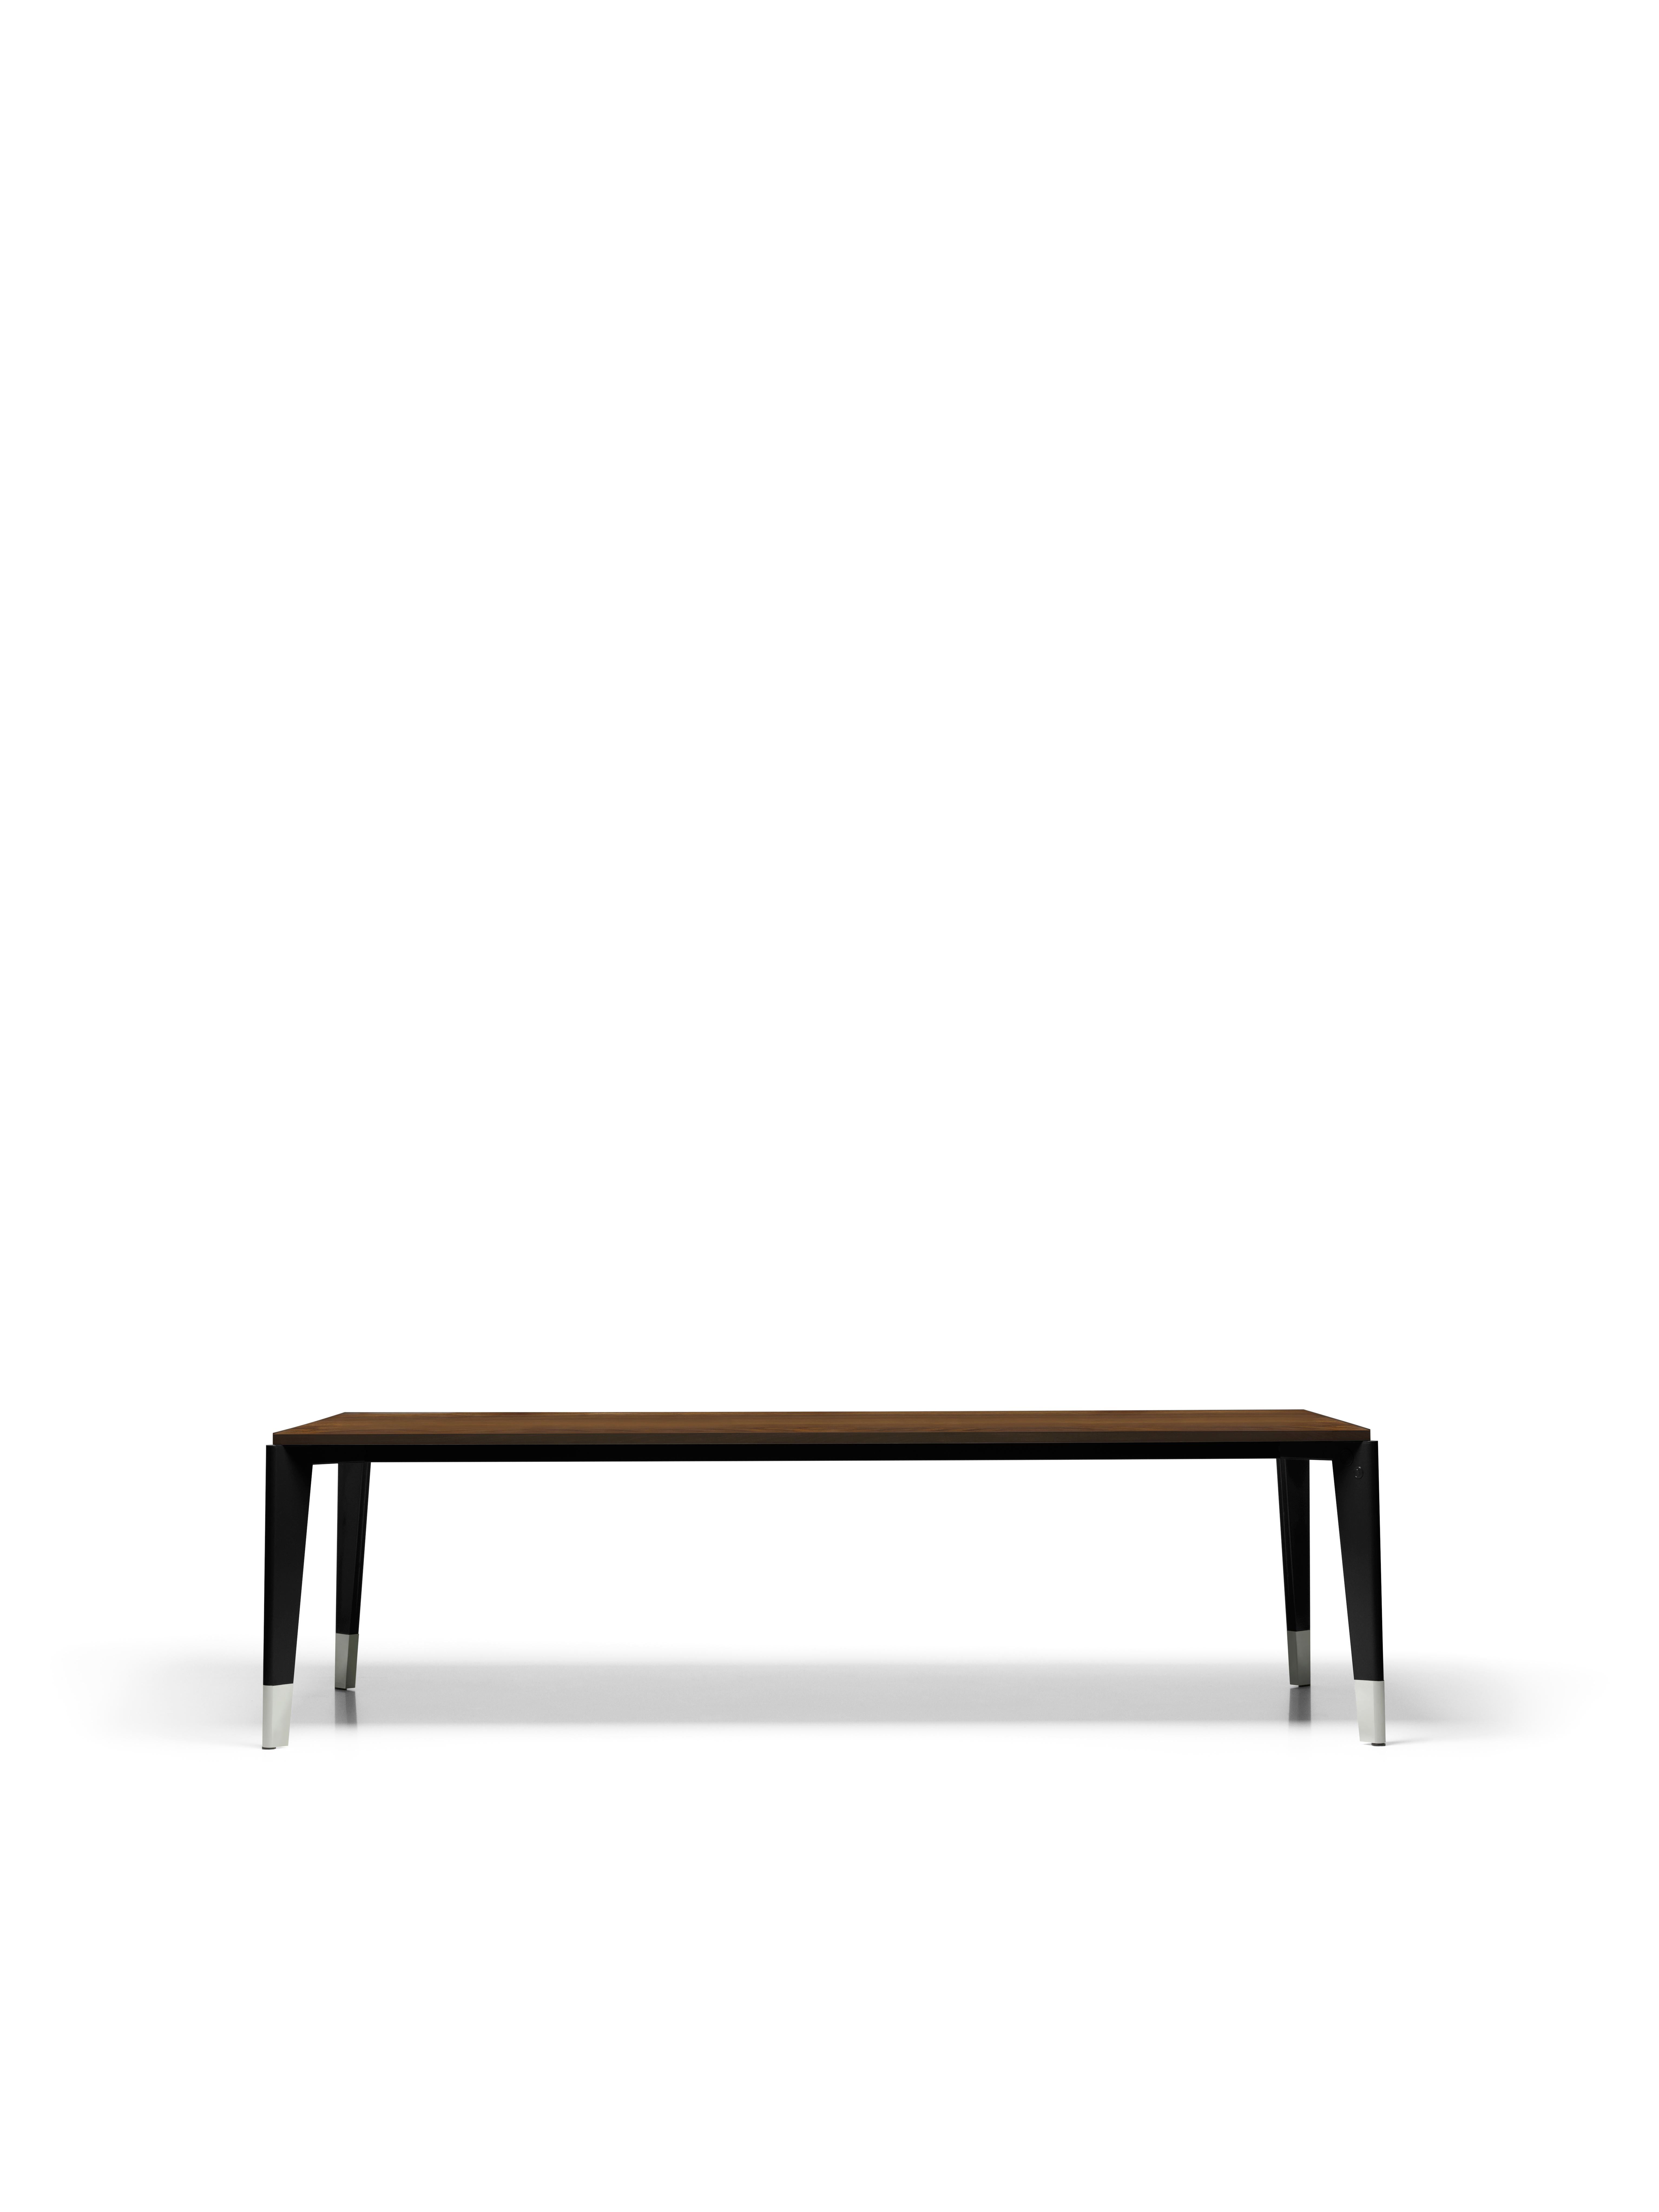 Oiled Vitra Flavigny Table in Natural Oak by Jean Prouvé